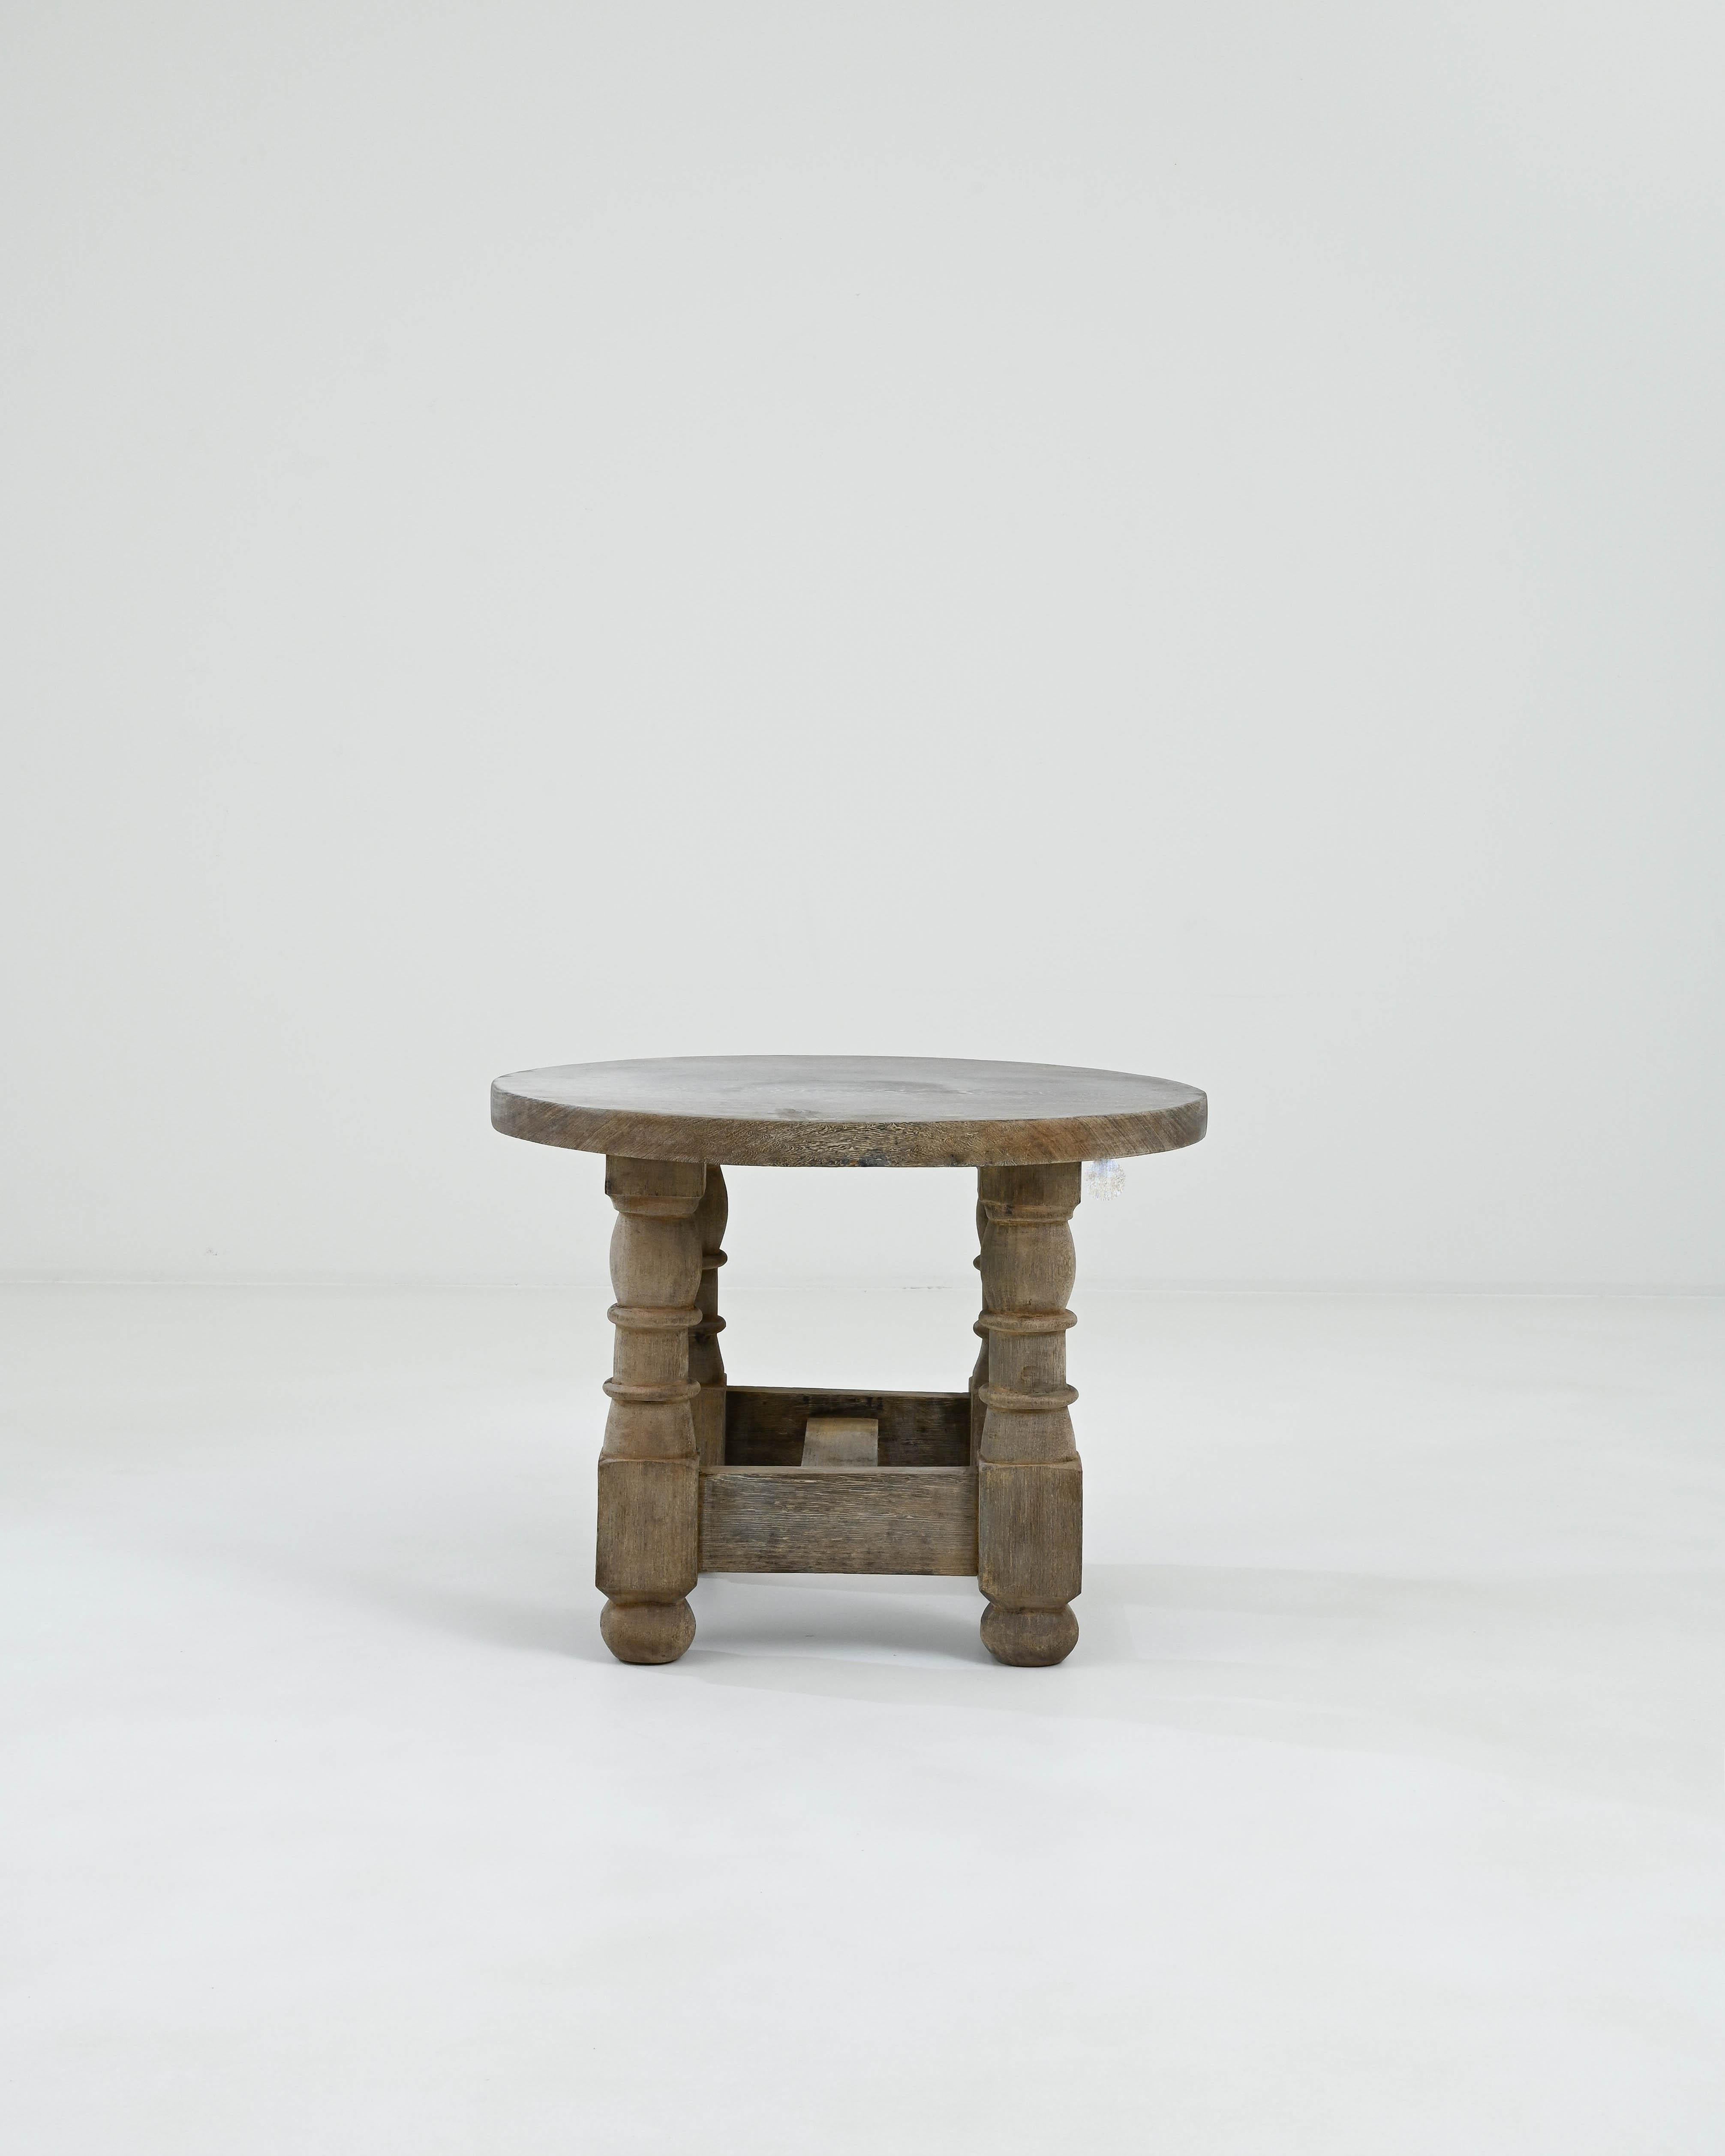 A wooden coffee table created in 20th century Belgium. Stout and sturdy, this dark brown circular coffee table boasts an elegance that charms the eye and brings the room together. Four thick legs, which have been artfully lathed, connect together in